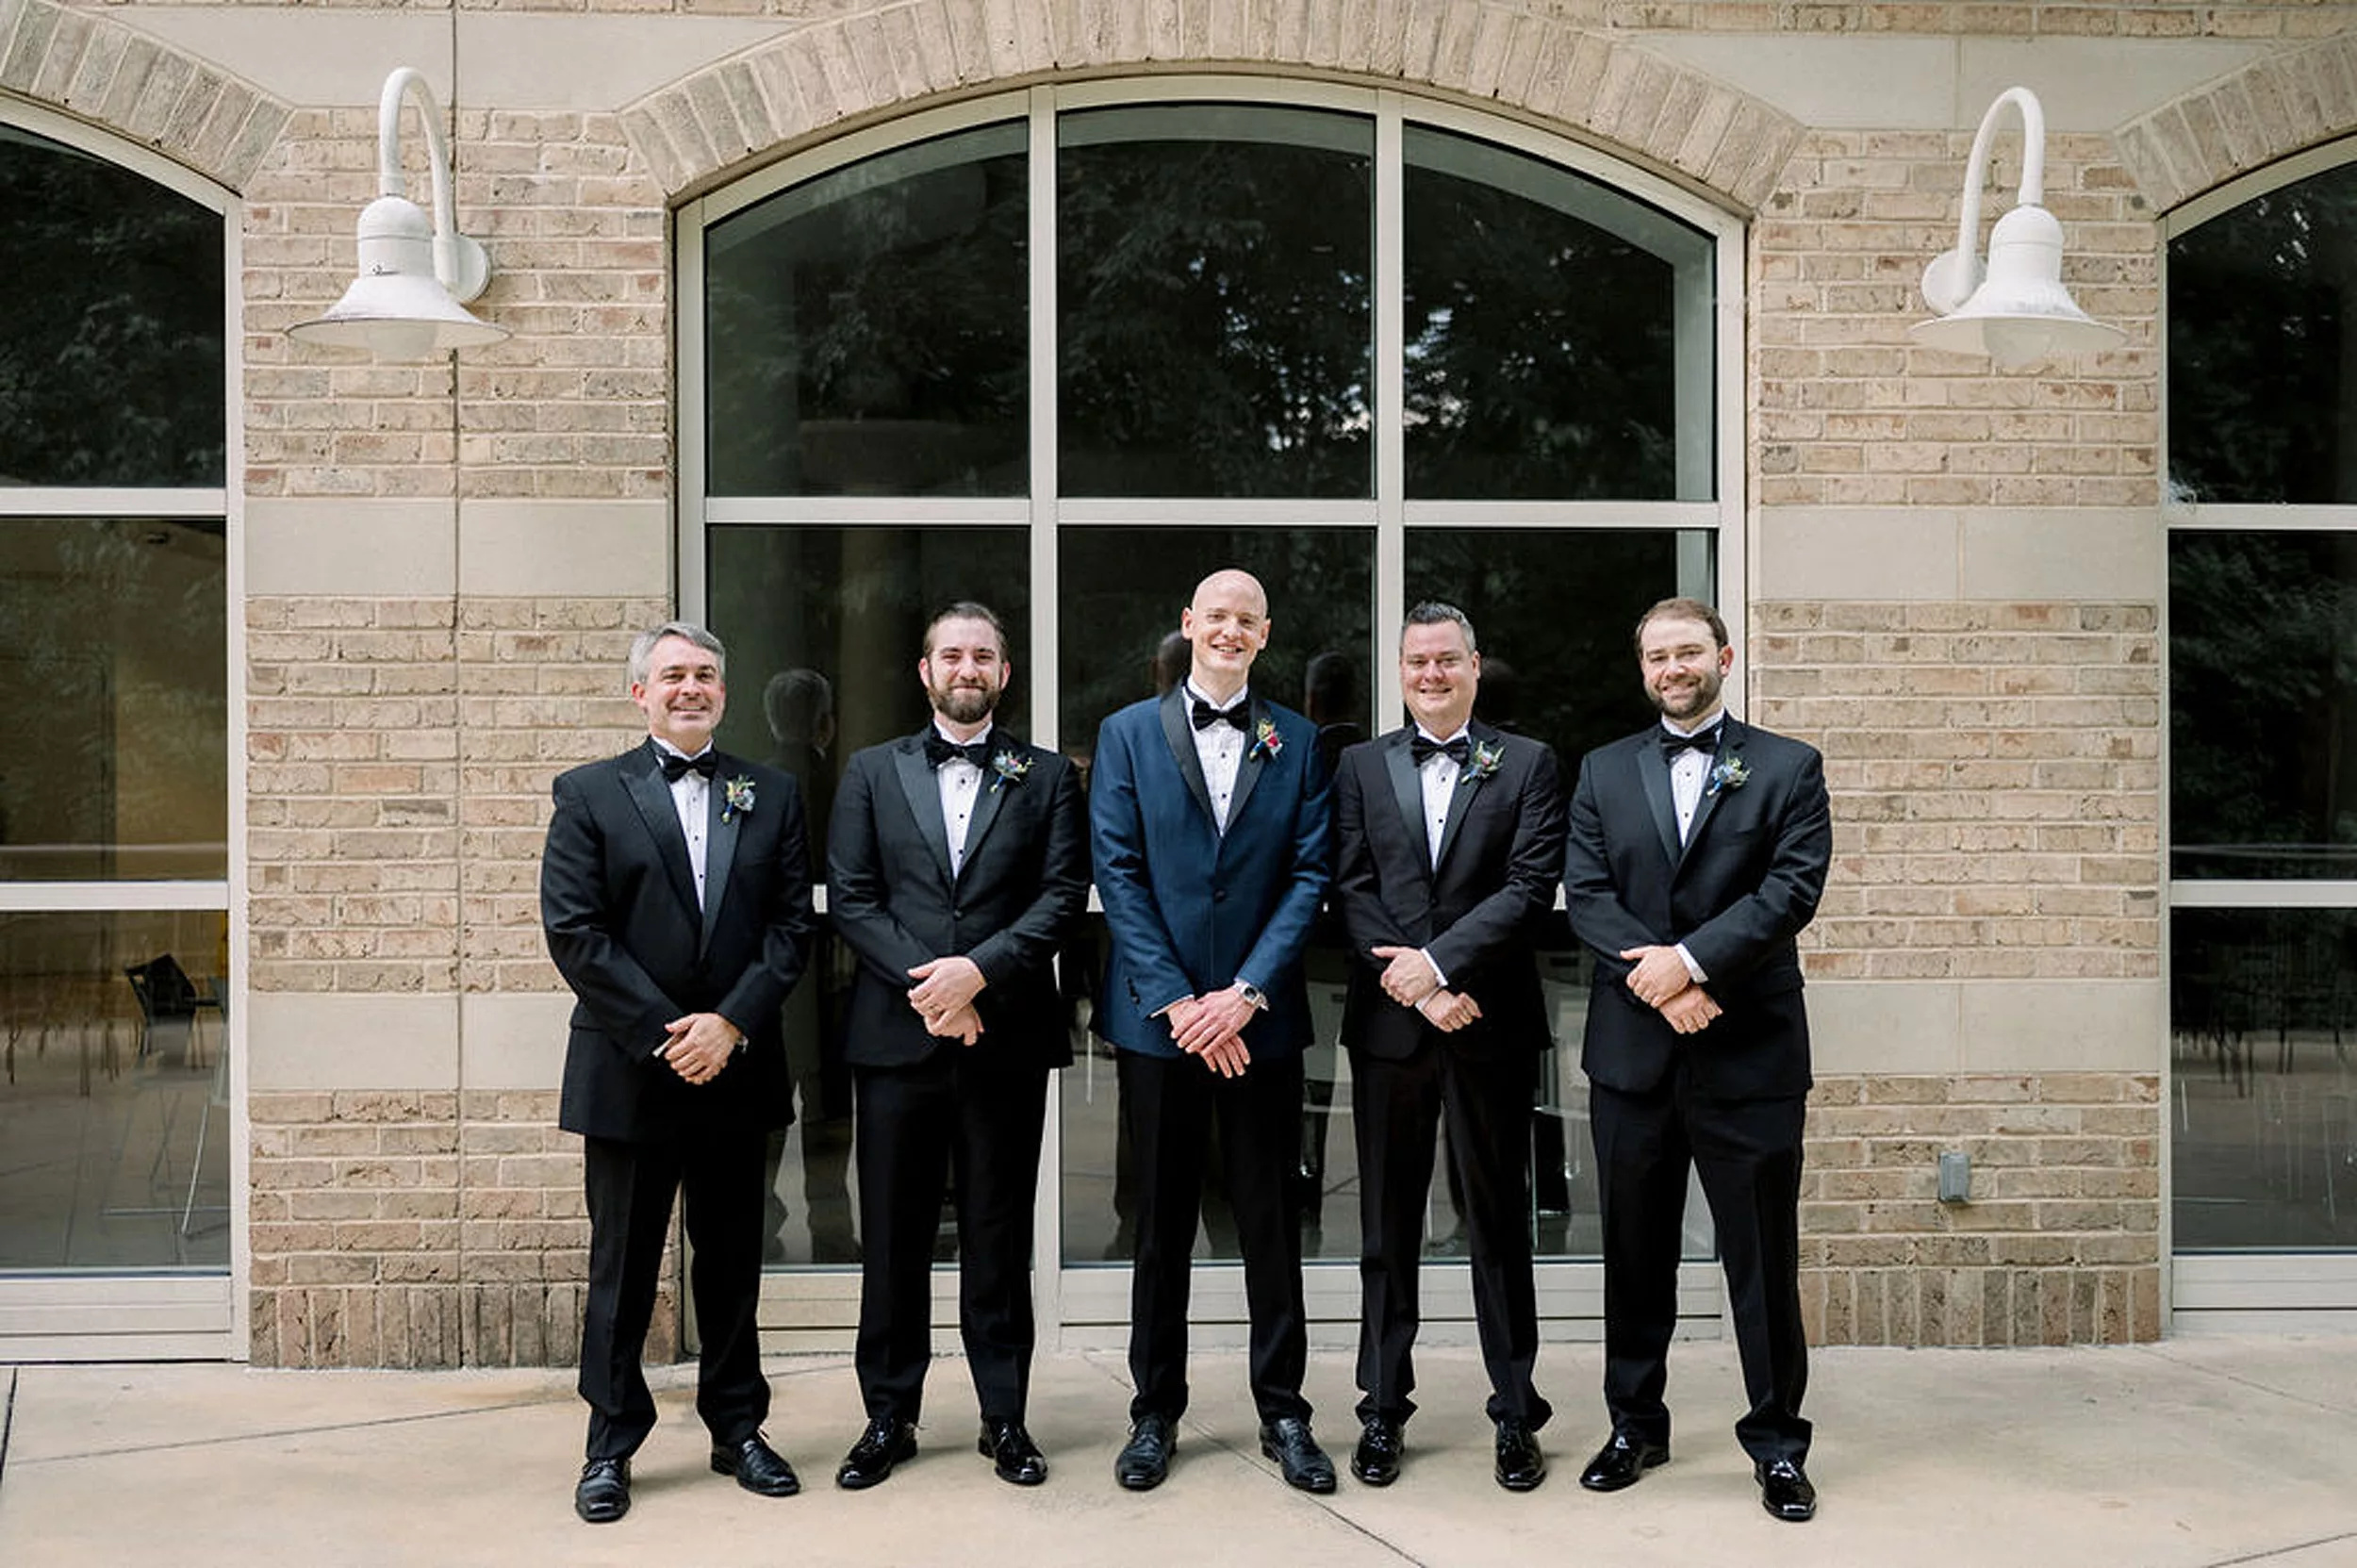 A groom in a blue tuxedo stands with with his groomsmen in black tuxedos in front of large windows of a museum